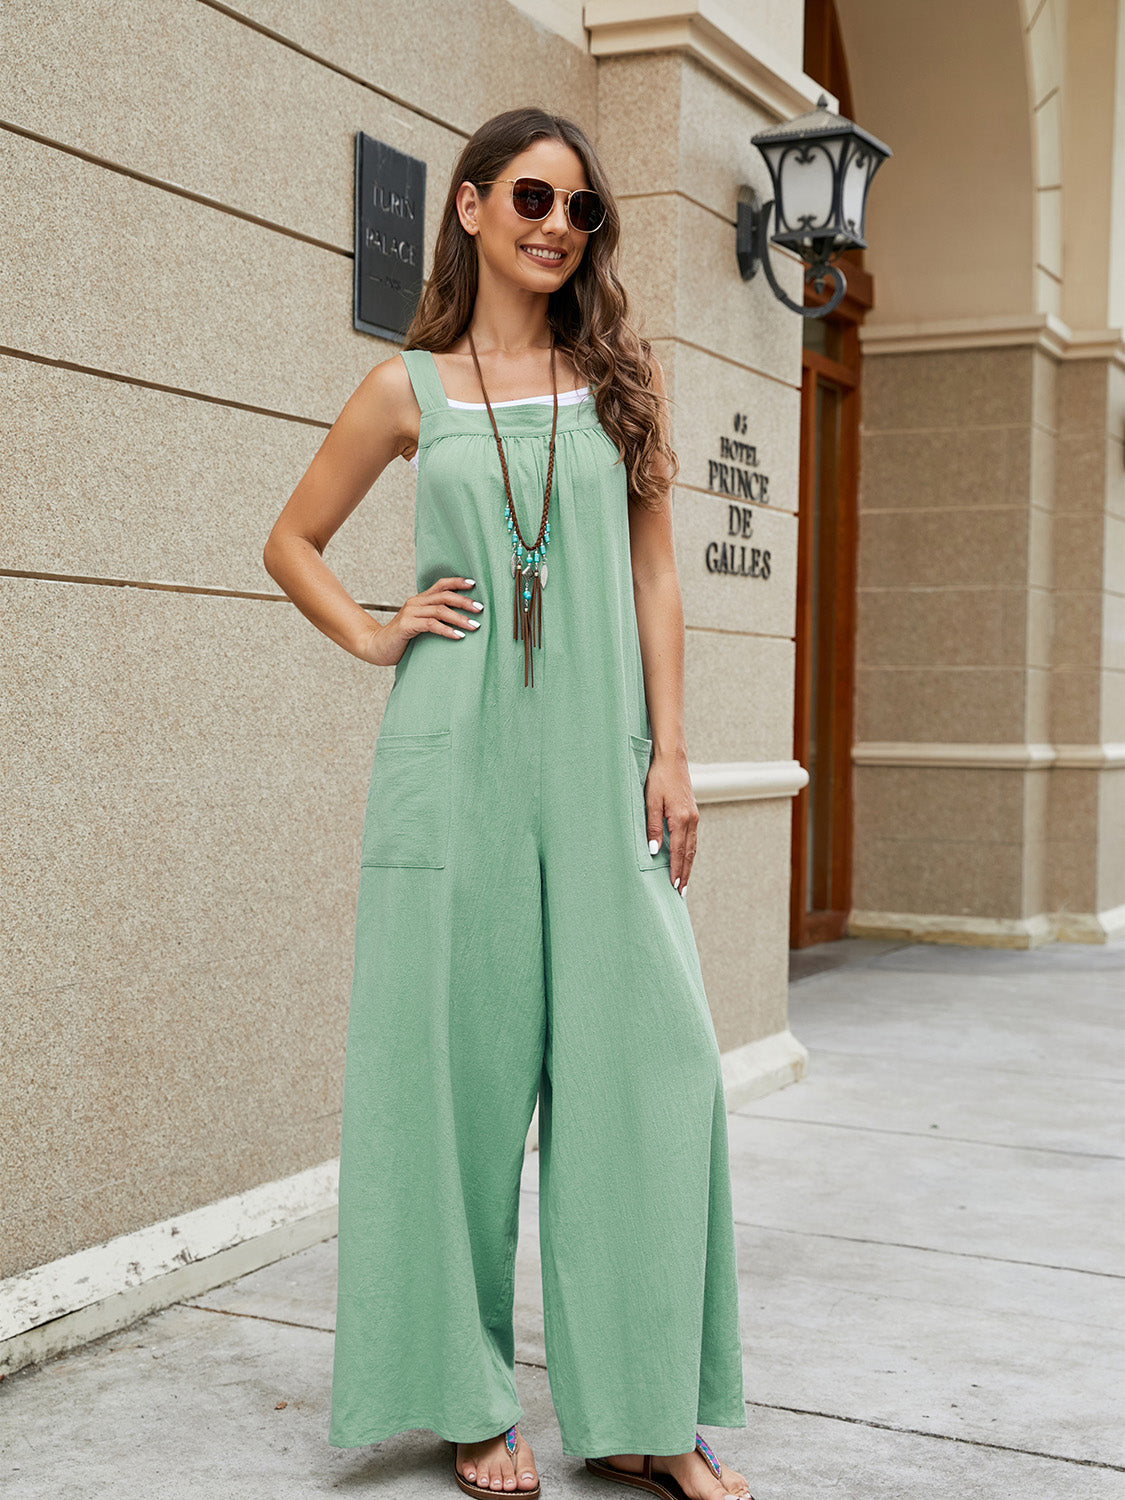 Square Neck Sleeveless Jumpsuit [CLICK FOR MORE]